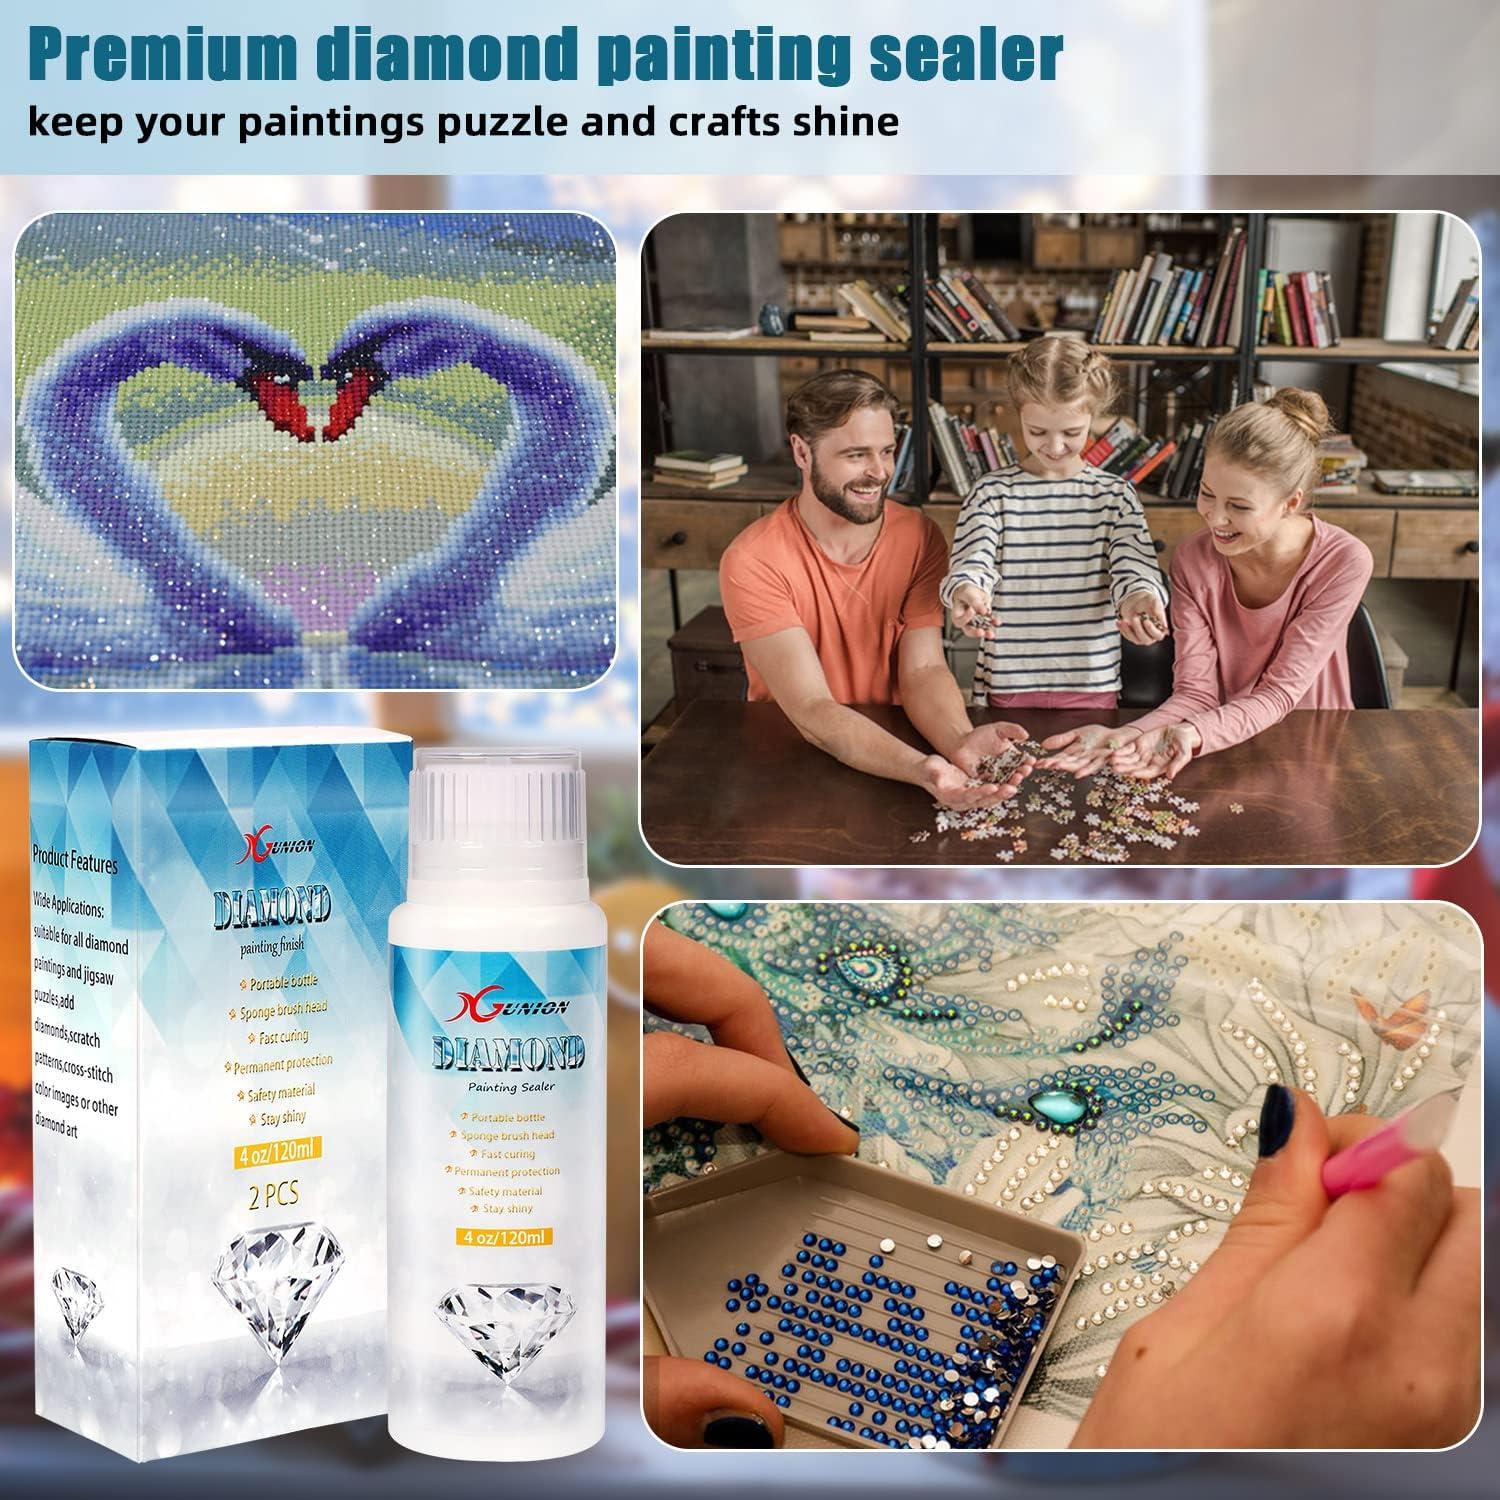 Eitseued 2 Pack 240ML Diamond Painting Sealer,Diamond Painting Glue with  Sponge Head,5D Diamond Painting Glue Permanent Hold & Shine Effect,DIY